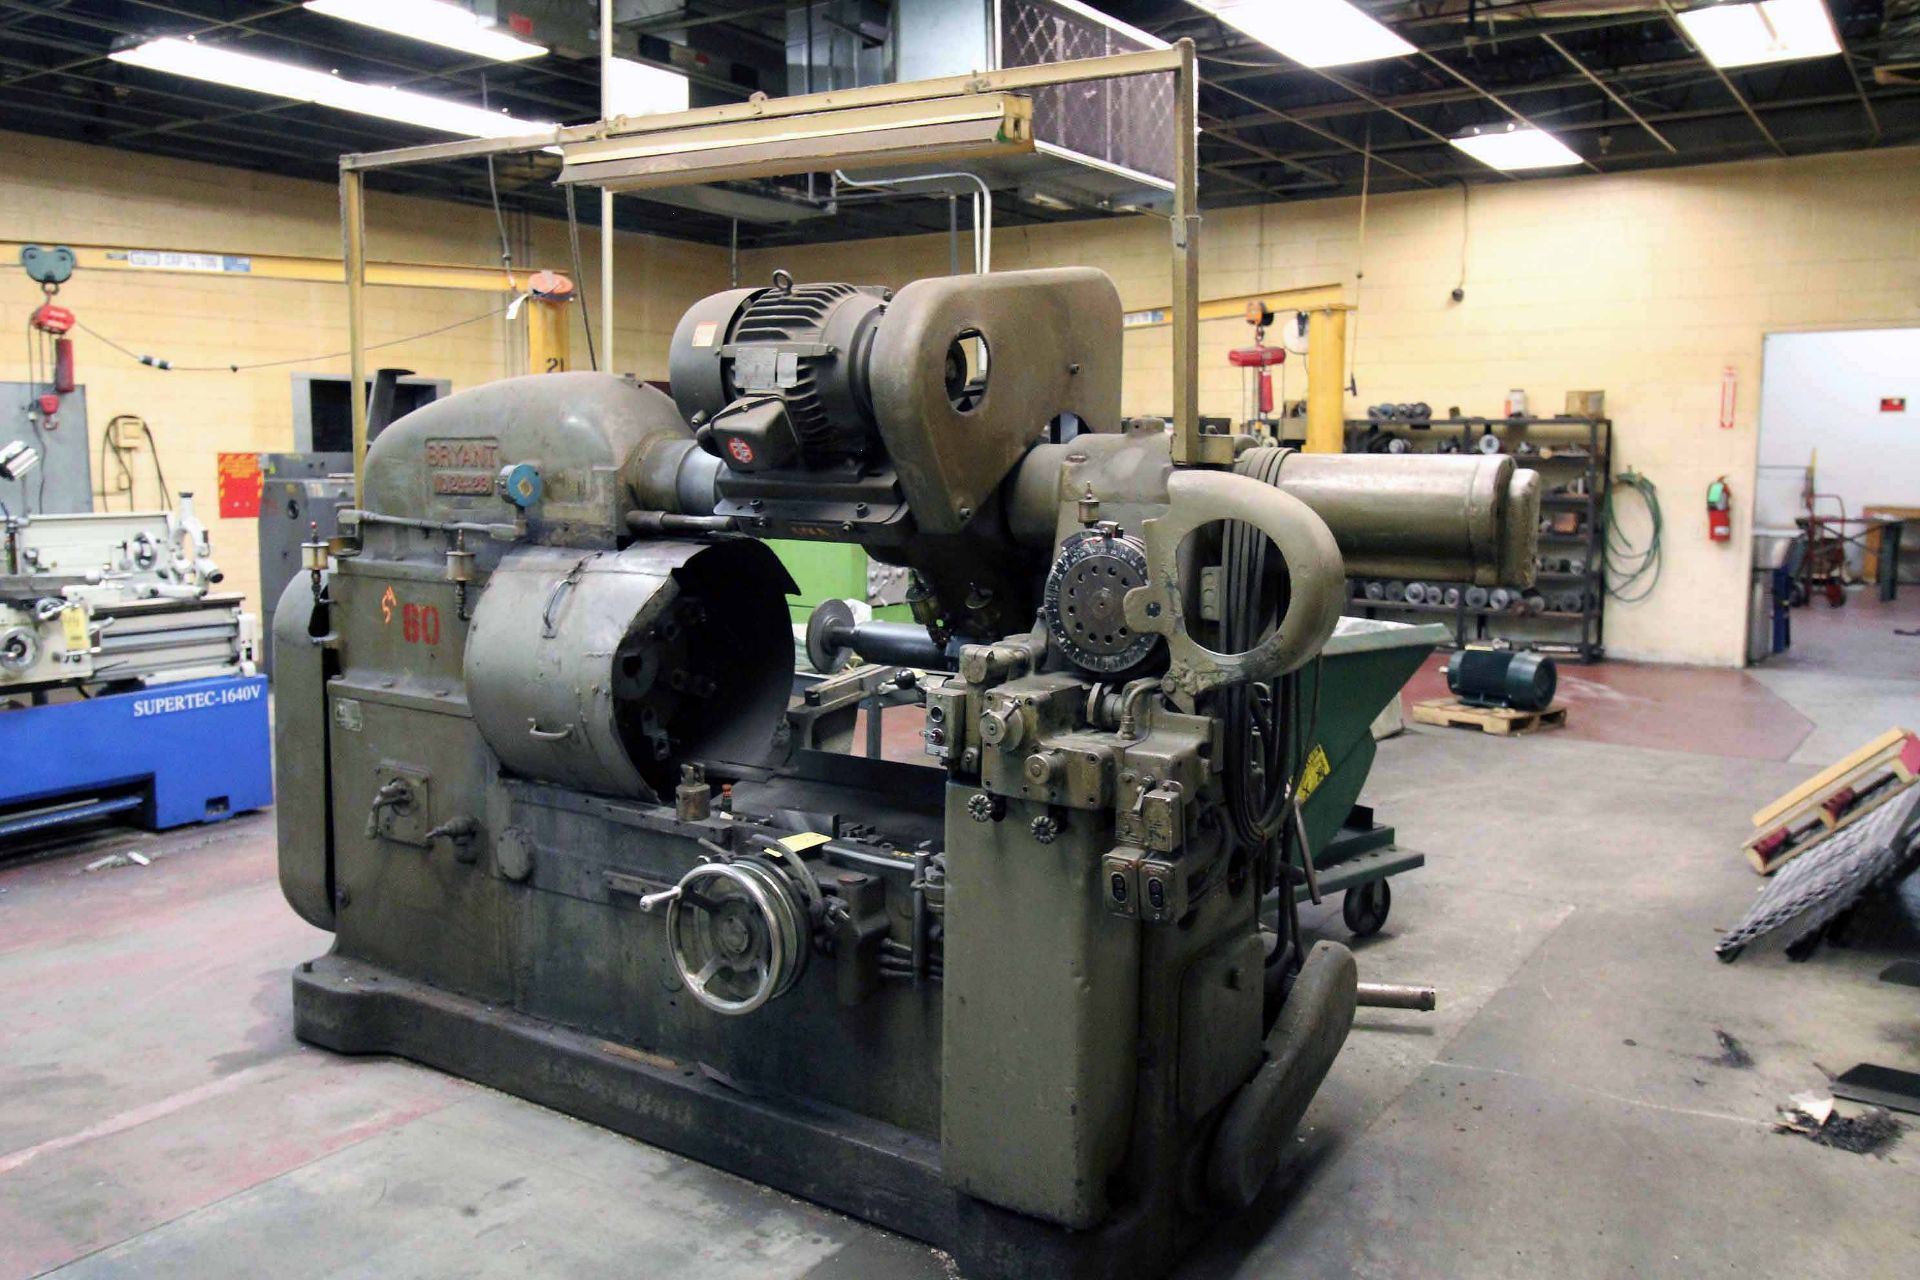 INTERNAL GRINDER, BRYANT NO. 24-26, 15 HP grinding spdl. drive, 18” dia. 6-jaw chuck, auto. - Image 2 of 7